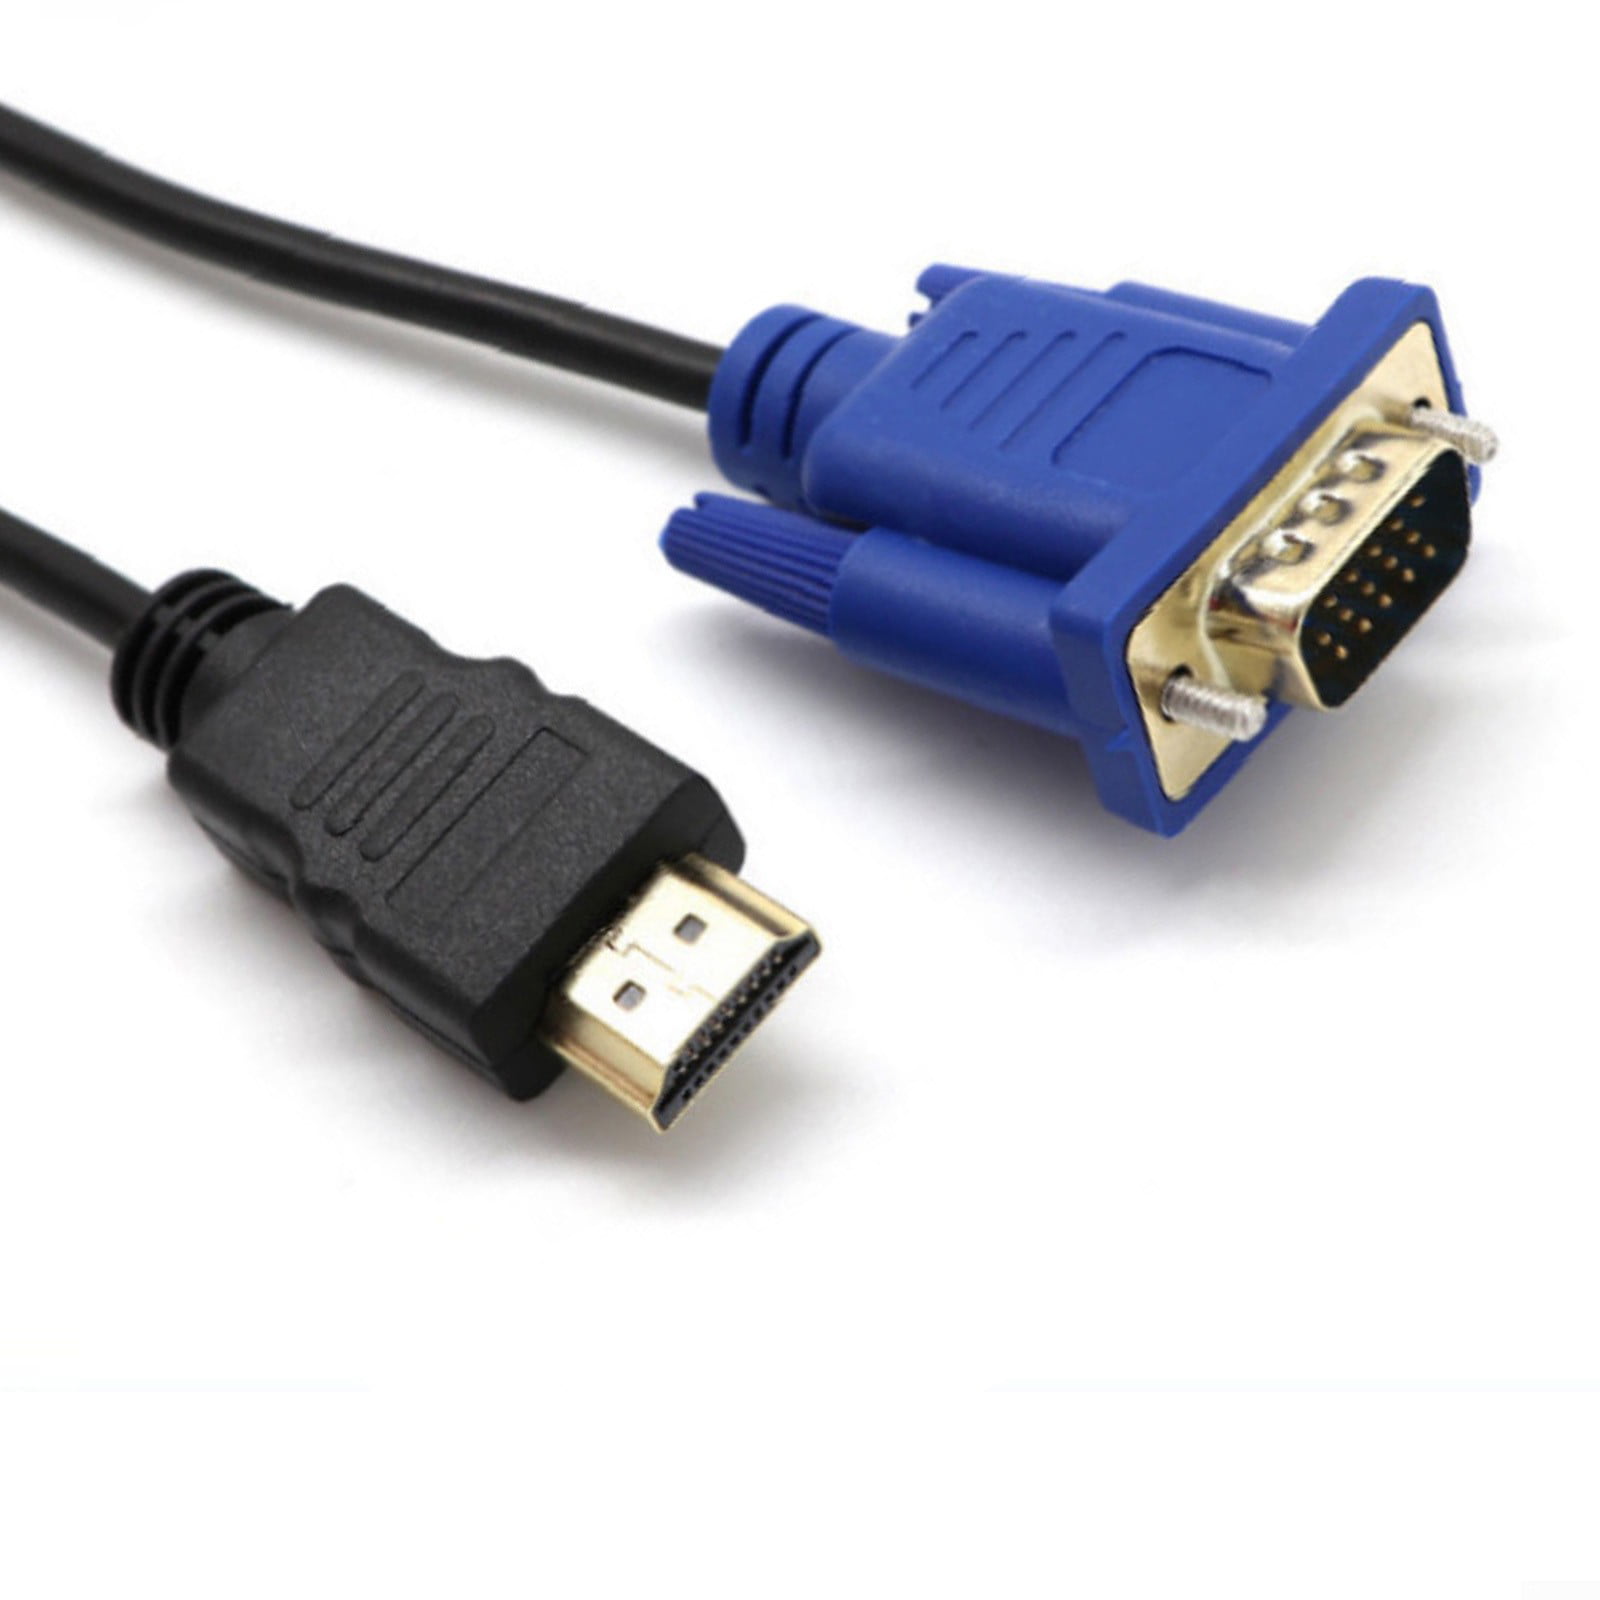 HDMI to VGA Cable HD-15 D-SUB Video Adapter HDMI Cables for PC HDTV Monitor 